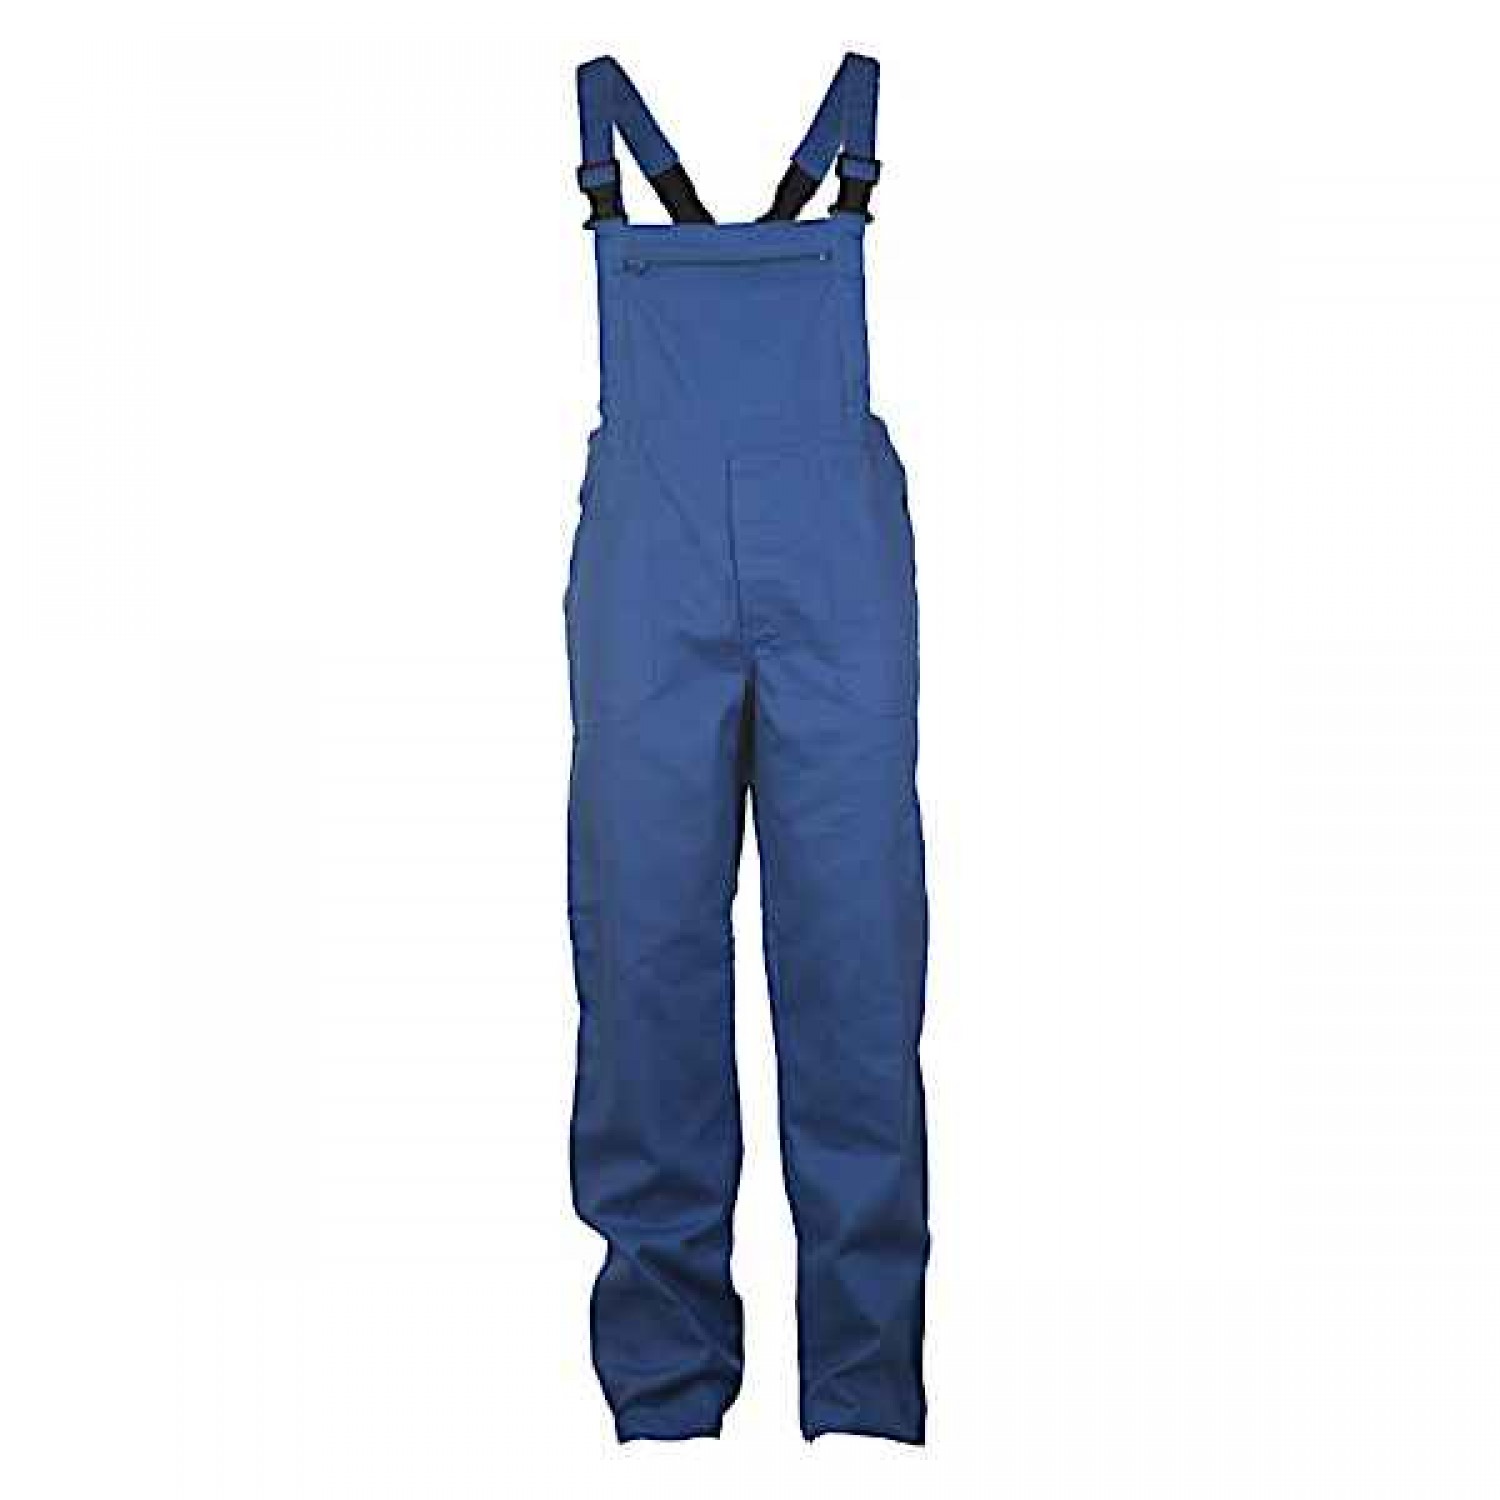 Work Trousers Dungarees Overalls Blue 04.16.0210 ATLANTIS